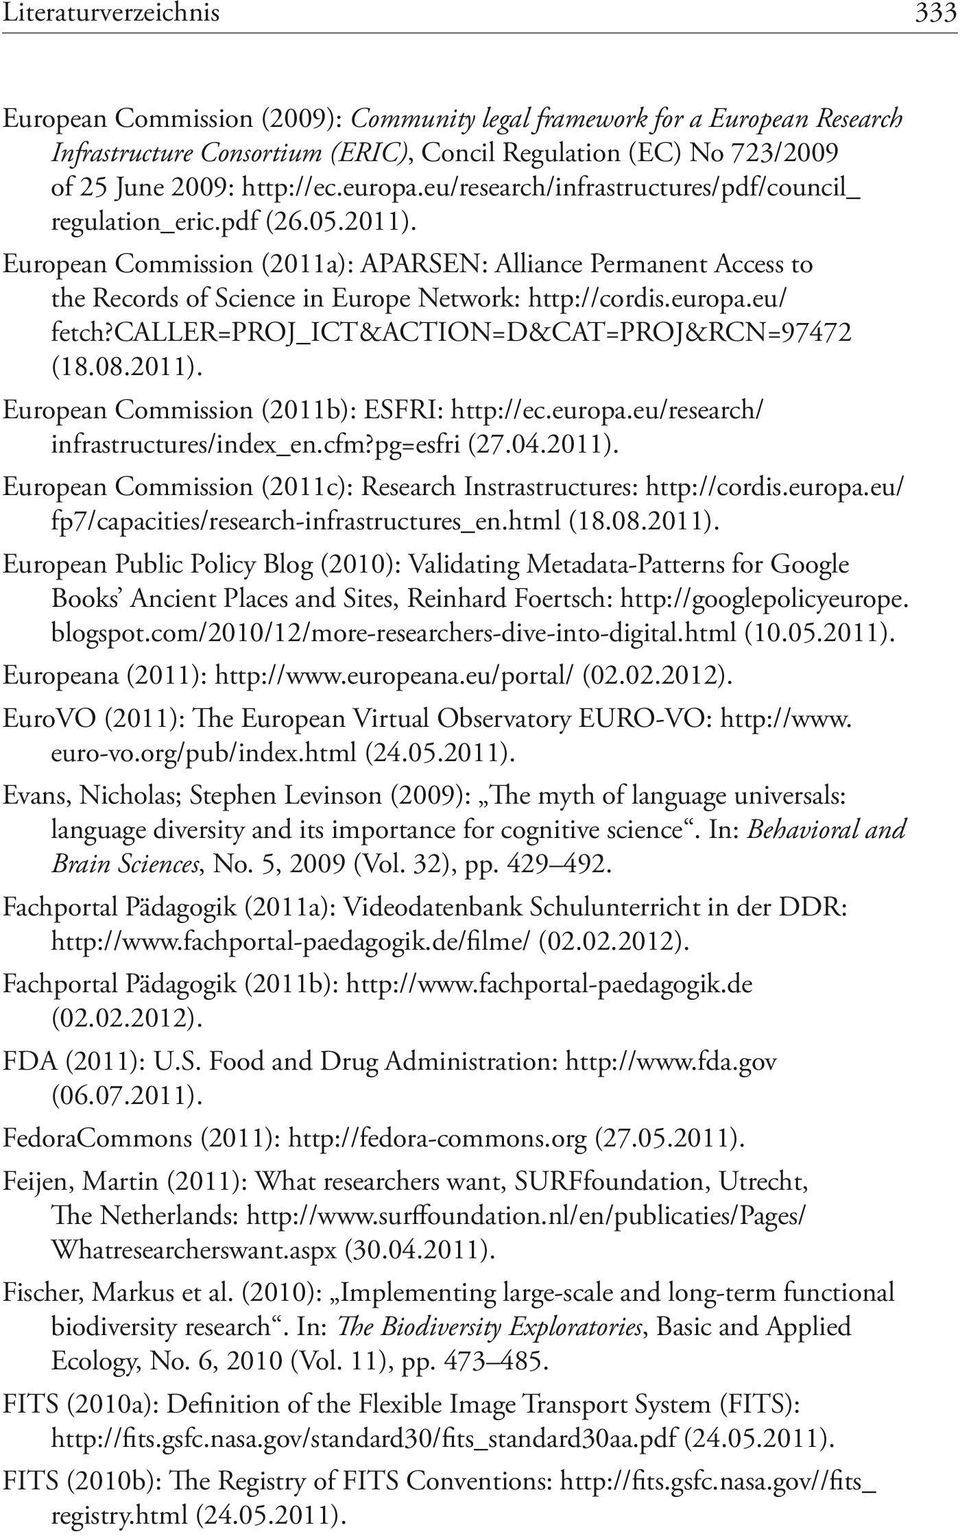 European Commission (2011a): APARSEN: Alliance Permanent Access to the Records of Science in Europe Network: http://cordis.europa.eu/ fetch?caller=proj_ict&action=d&cat=proj&rcn=97472 (18.08.2011).